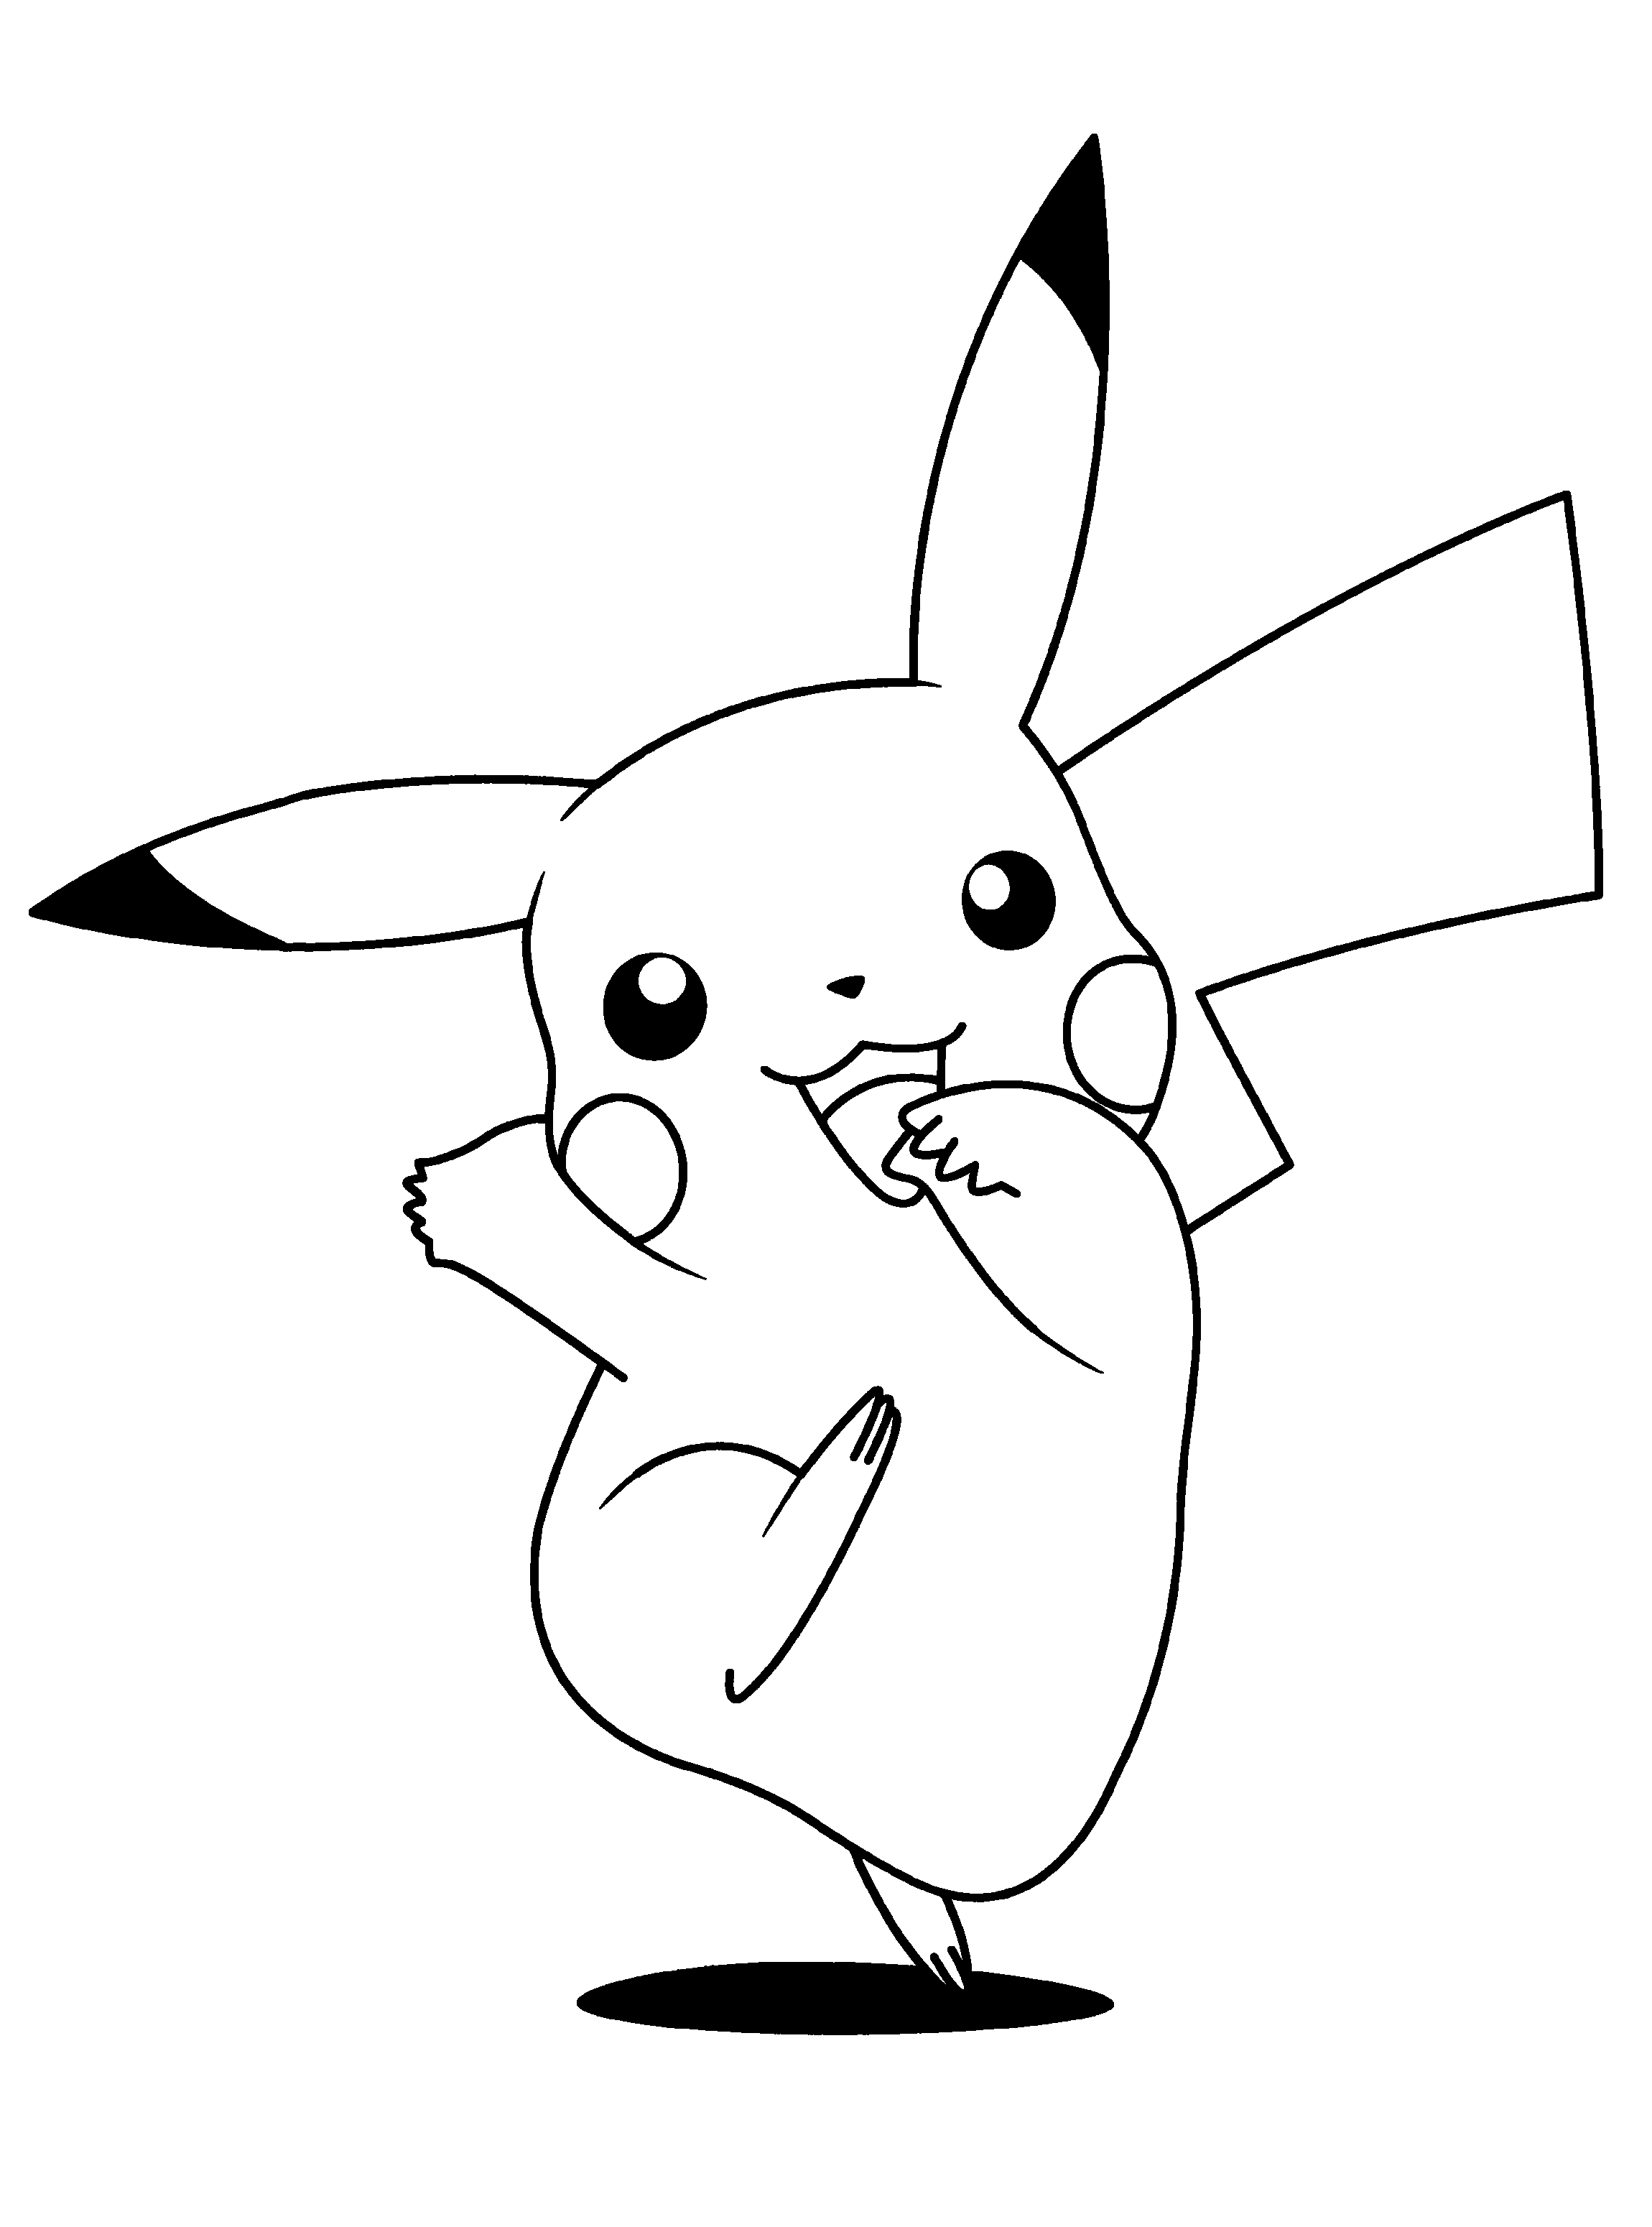 Pokemon Coloring Pages (2) Coloring Kids - Coloring Kids